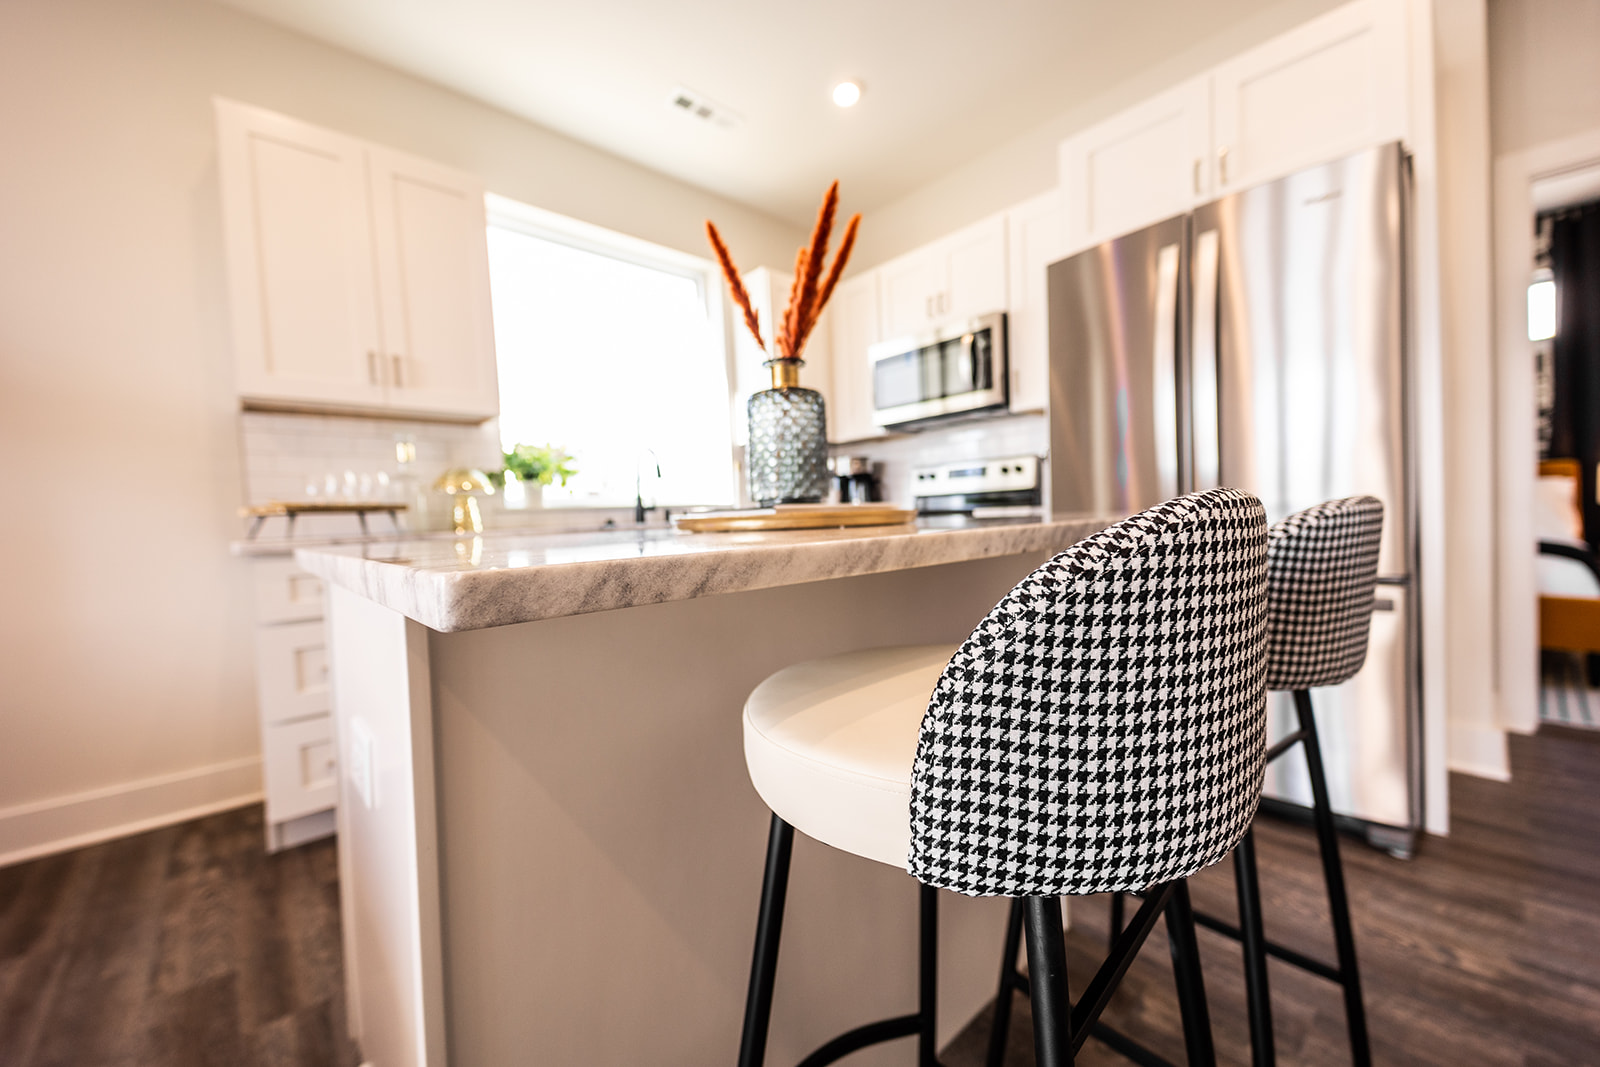 Unit 1 - Fully Equipped Kitchen stocked with your basic cooking essentials and stainless-steel appliances. (2nd Floor)